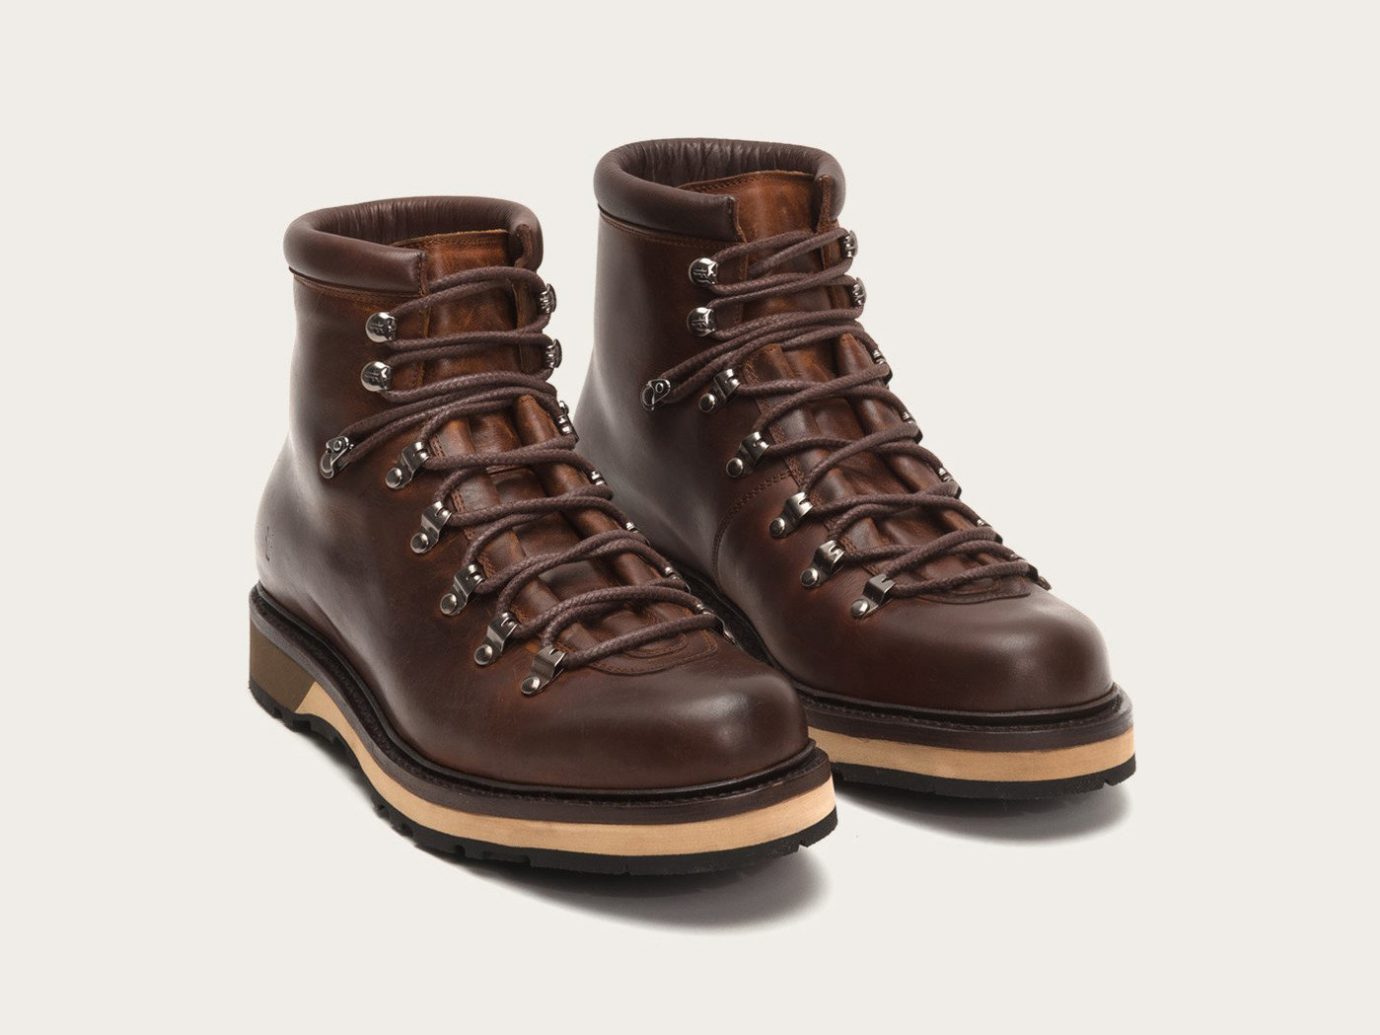 Style + Design Travel Shop footwear indoor clothing boot brown shoe work boots walking shoe leather chocolate product stack